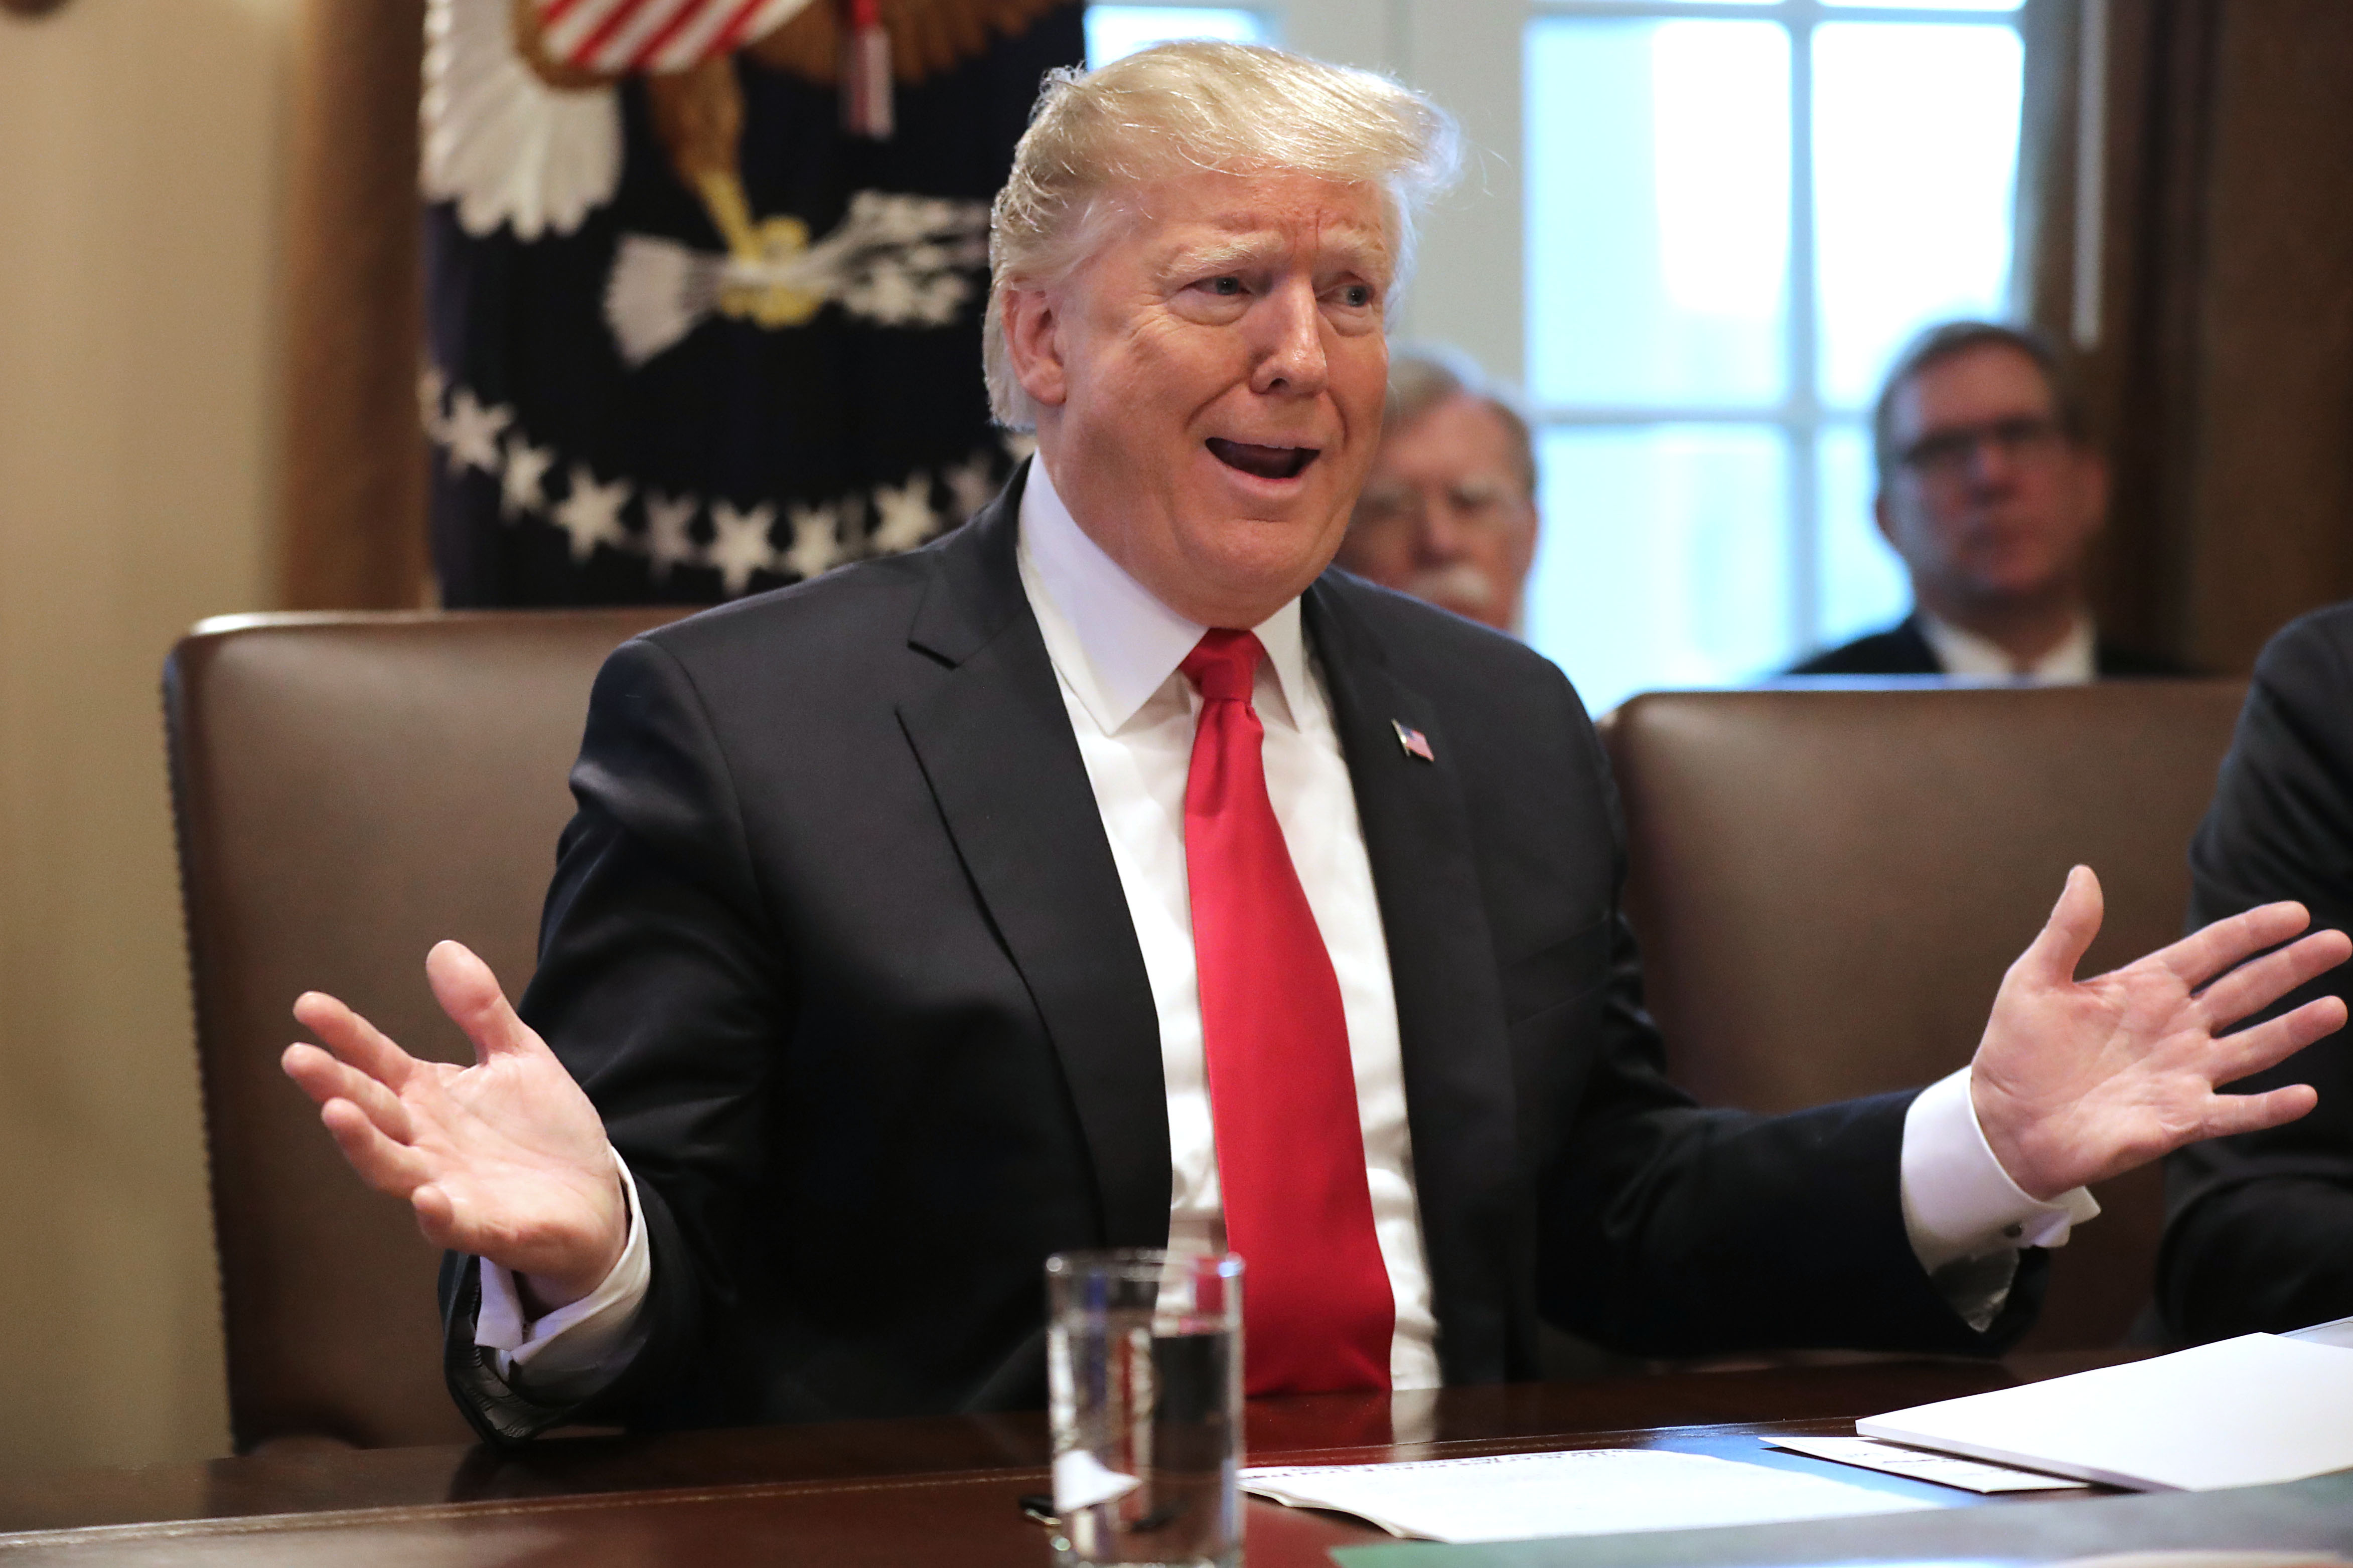 President Trump talks to journalists during a meeting of his Cabinet at the White House on January 02, 2019.